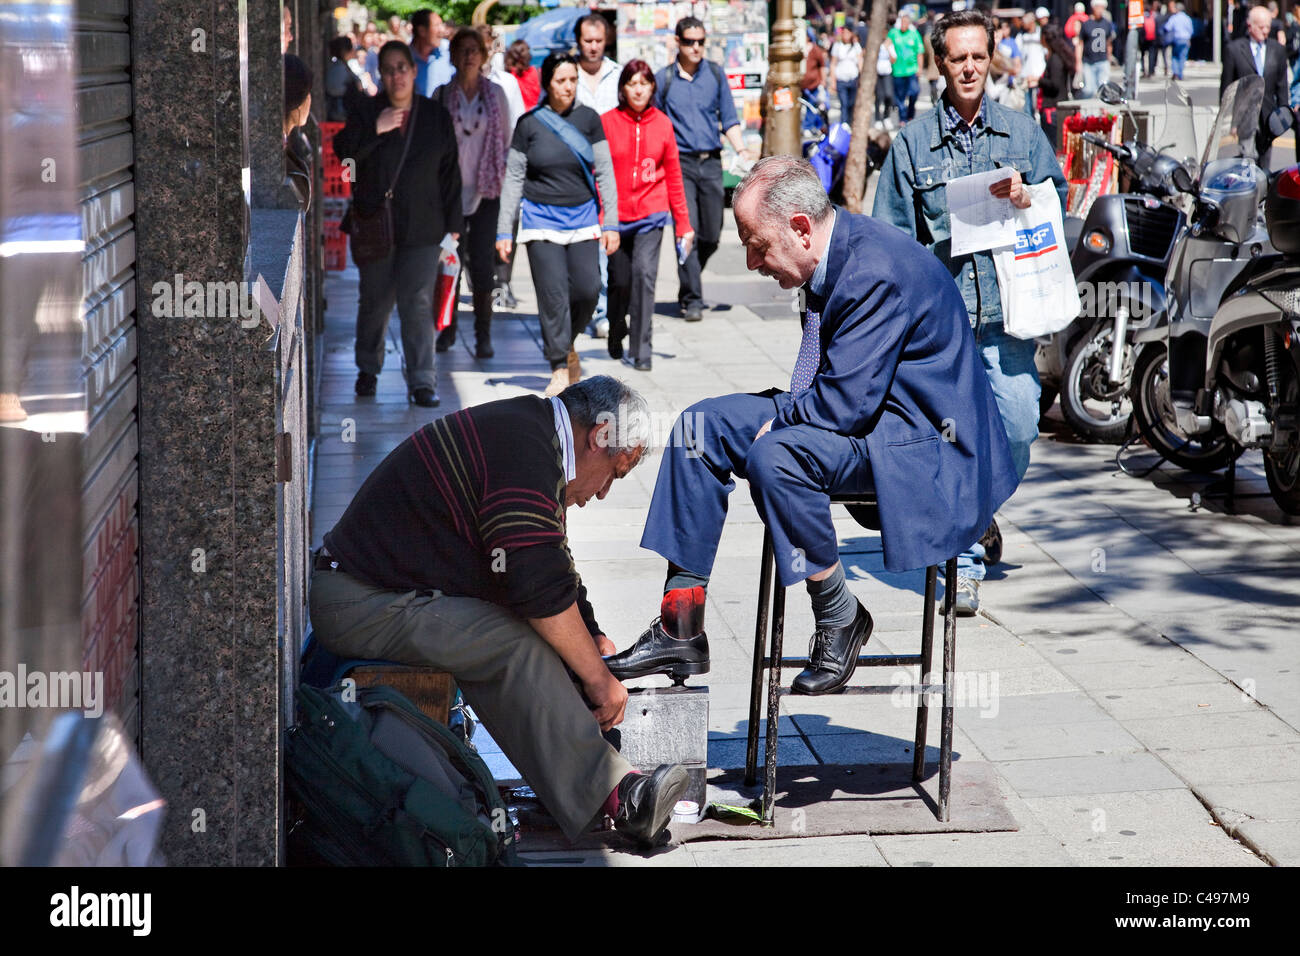 Street scene with shoeshine man, Buenos Aires, Argentina, South America. Stock Photo